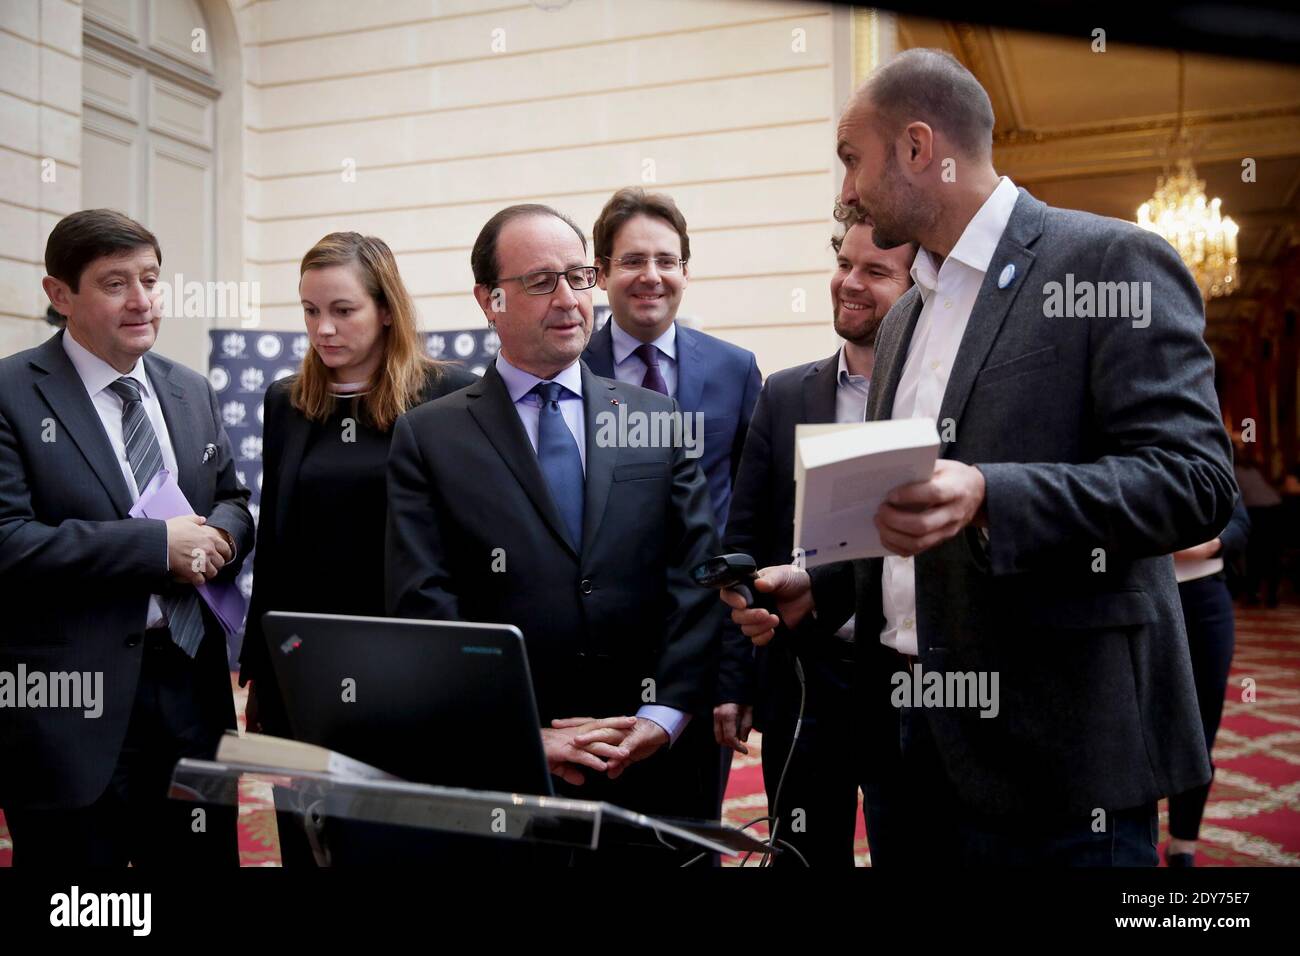 French President Francois Hollande along with Secretary of State for Digital Economy Axelle Lemaire, Minister for Cities, Youth and Sport Patrick Kanner and Secretary of State for Foreign Trade, Tourism Promotion and French Citizens Living Abroad Matthias Fekl at a reception at the Elysee Palace as part of the Social Good Week 2014, in Paris, France on December 4, 2014. Photo Pool by Thomas Padilla/ABACAPRESS.COM Stock Photo